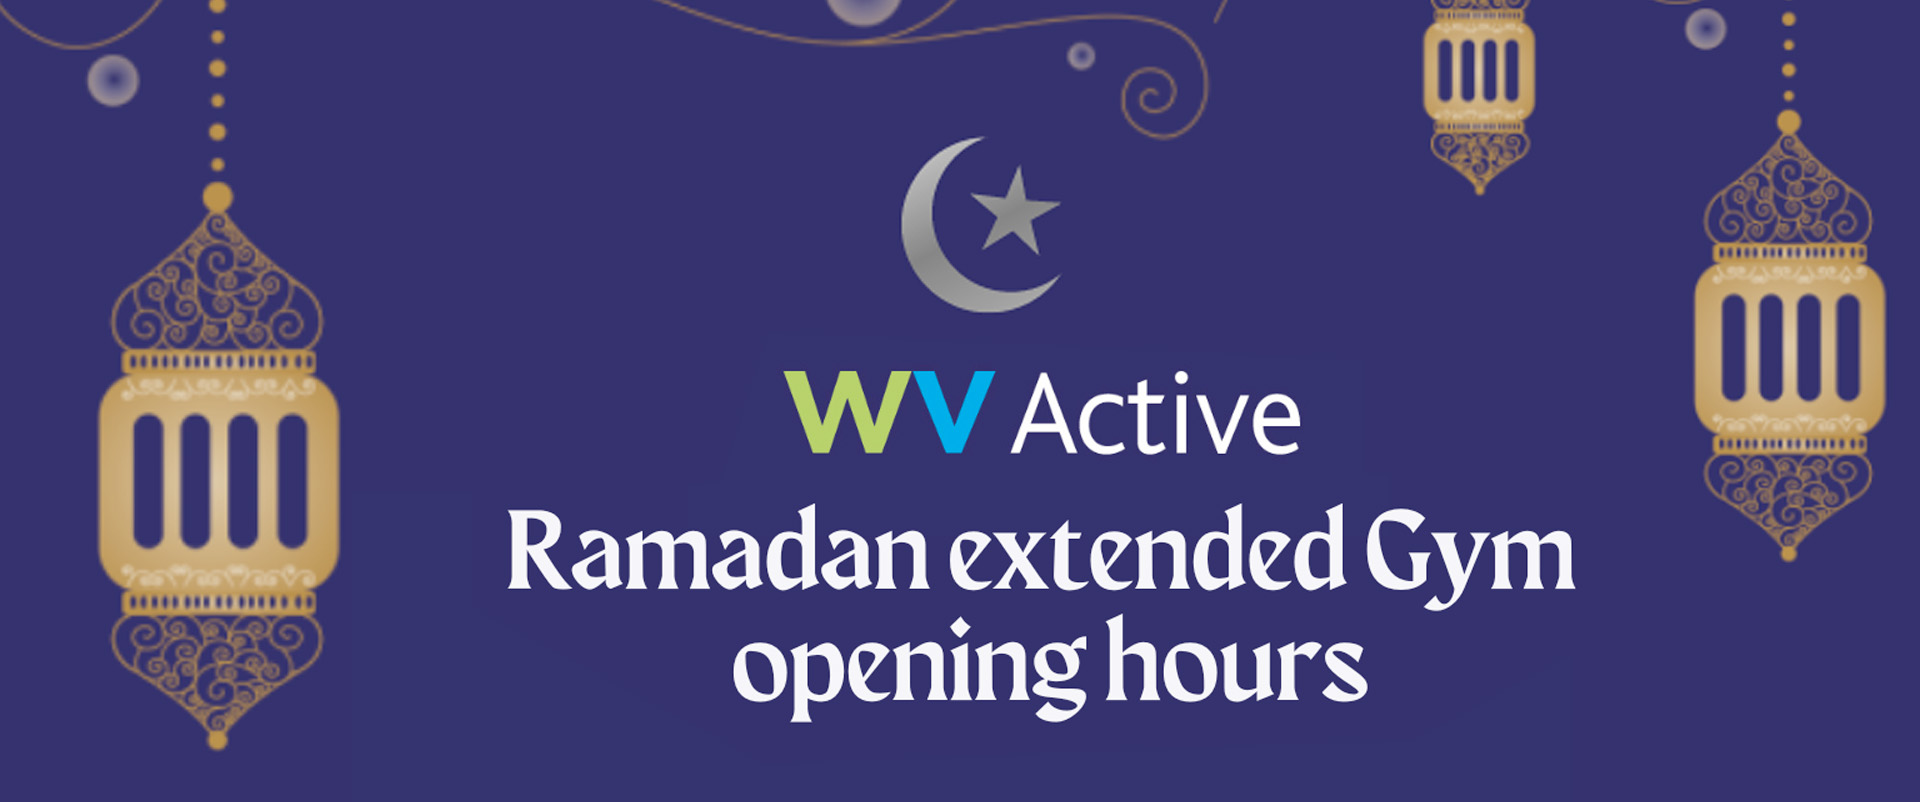 Extended gym opening hours during Ramadan